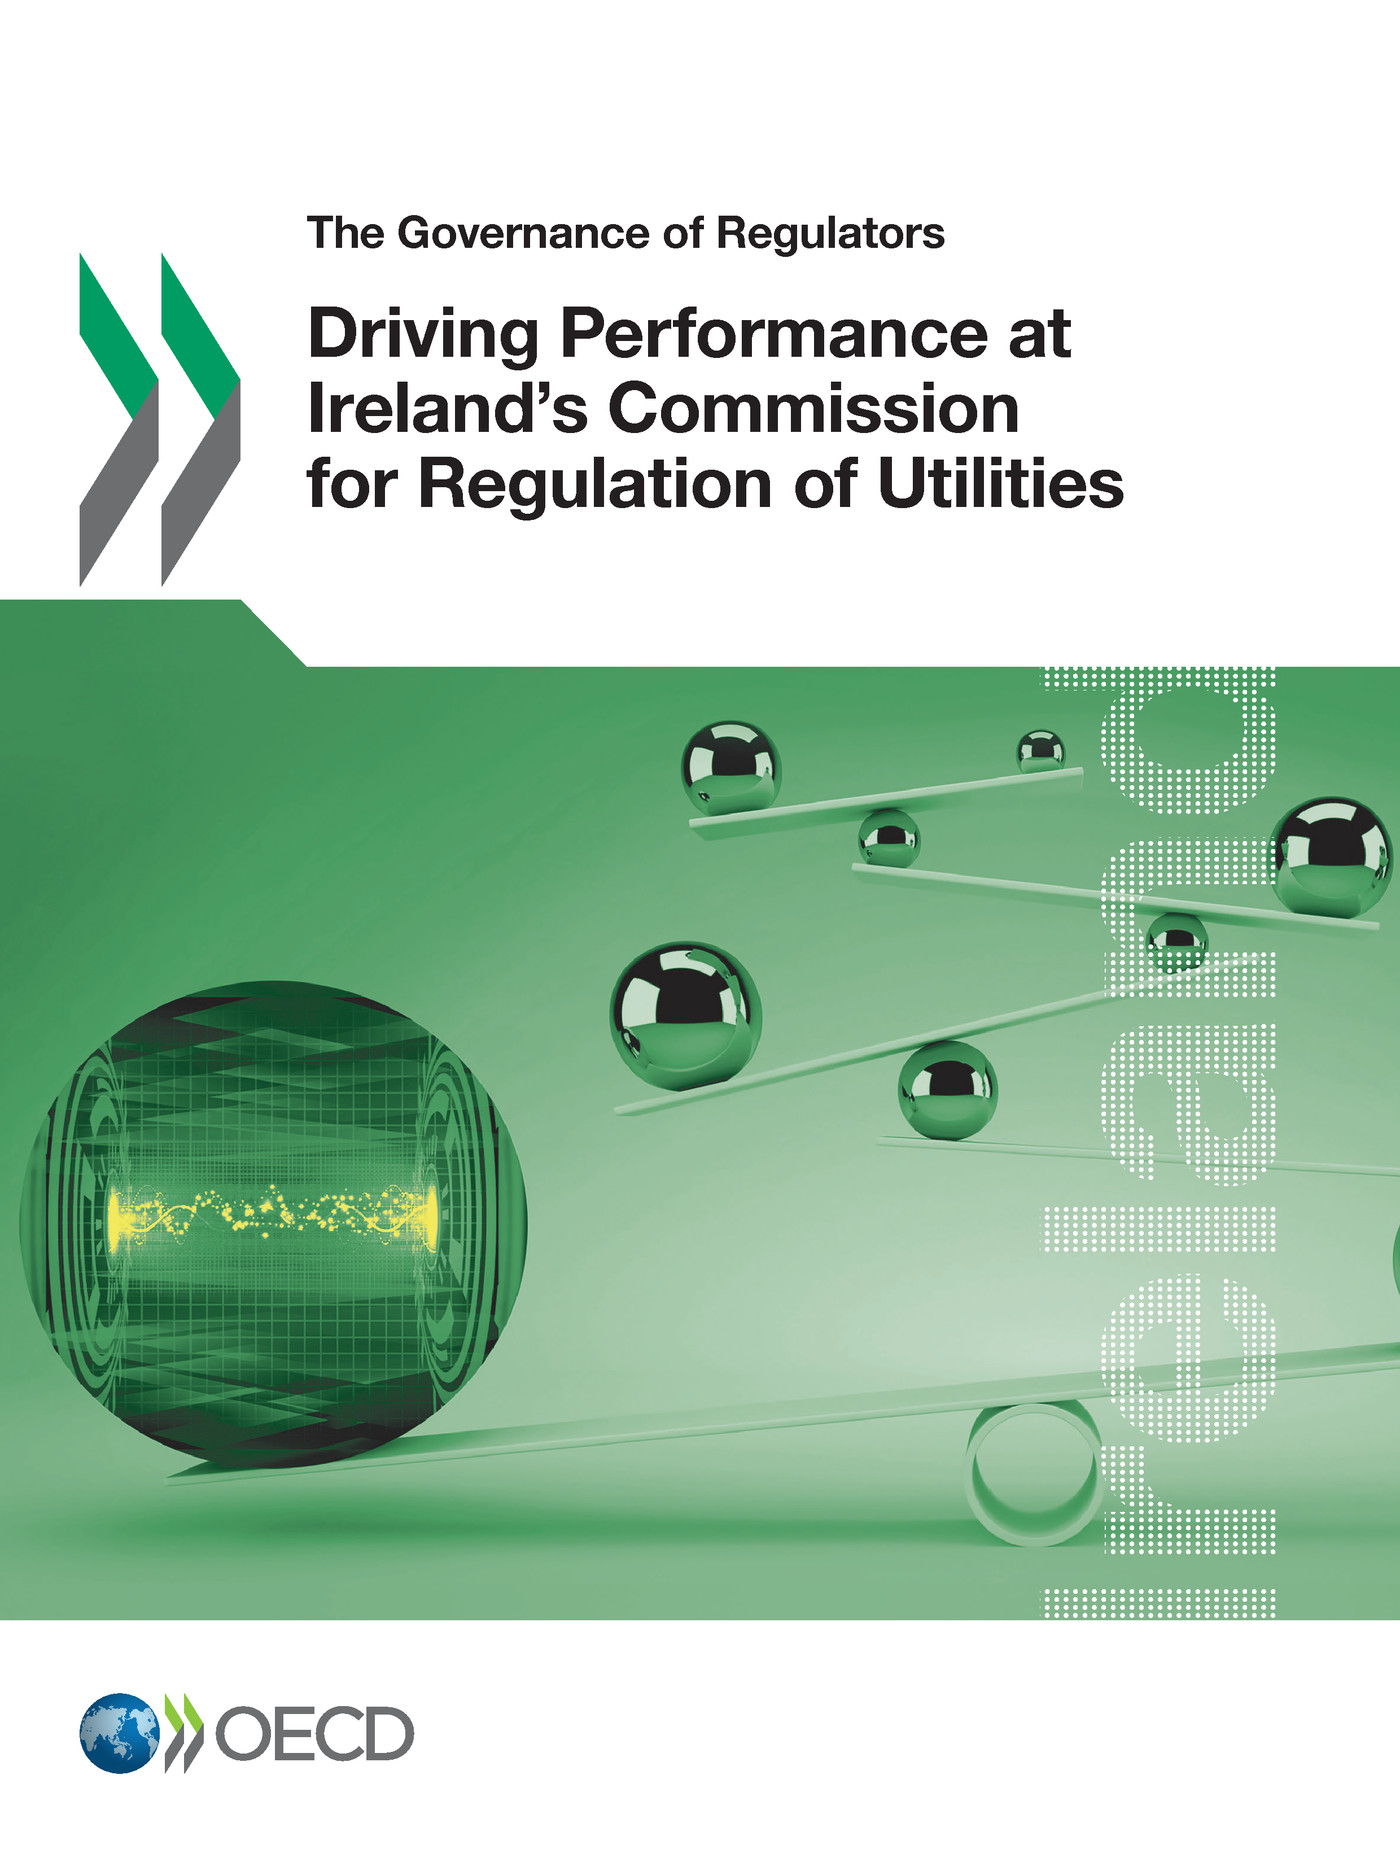 Driving Performance at Ireland's Commission for Regulation of Utilities -  Collectif - OCDE / OECD